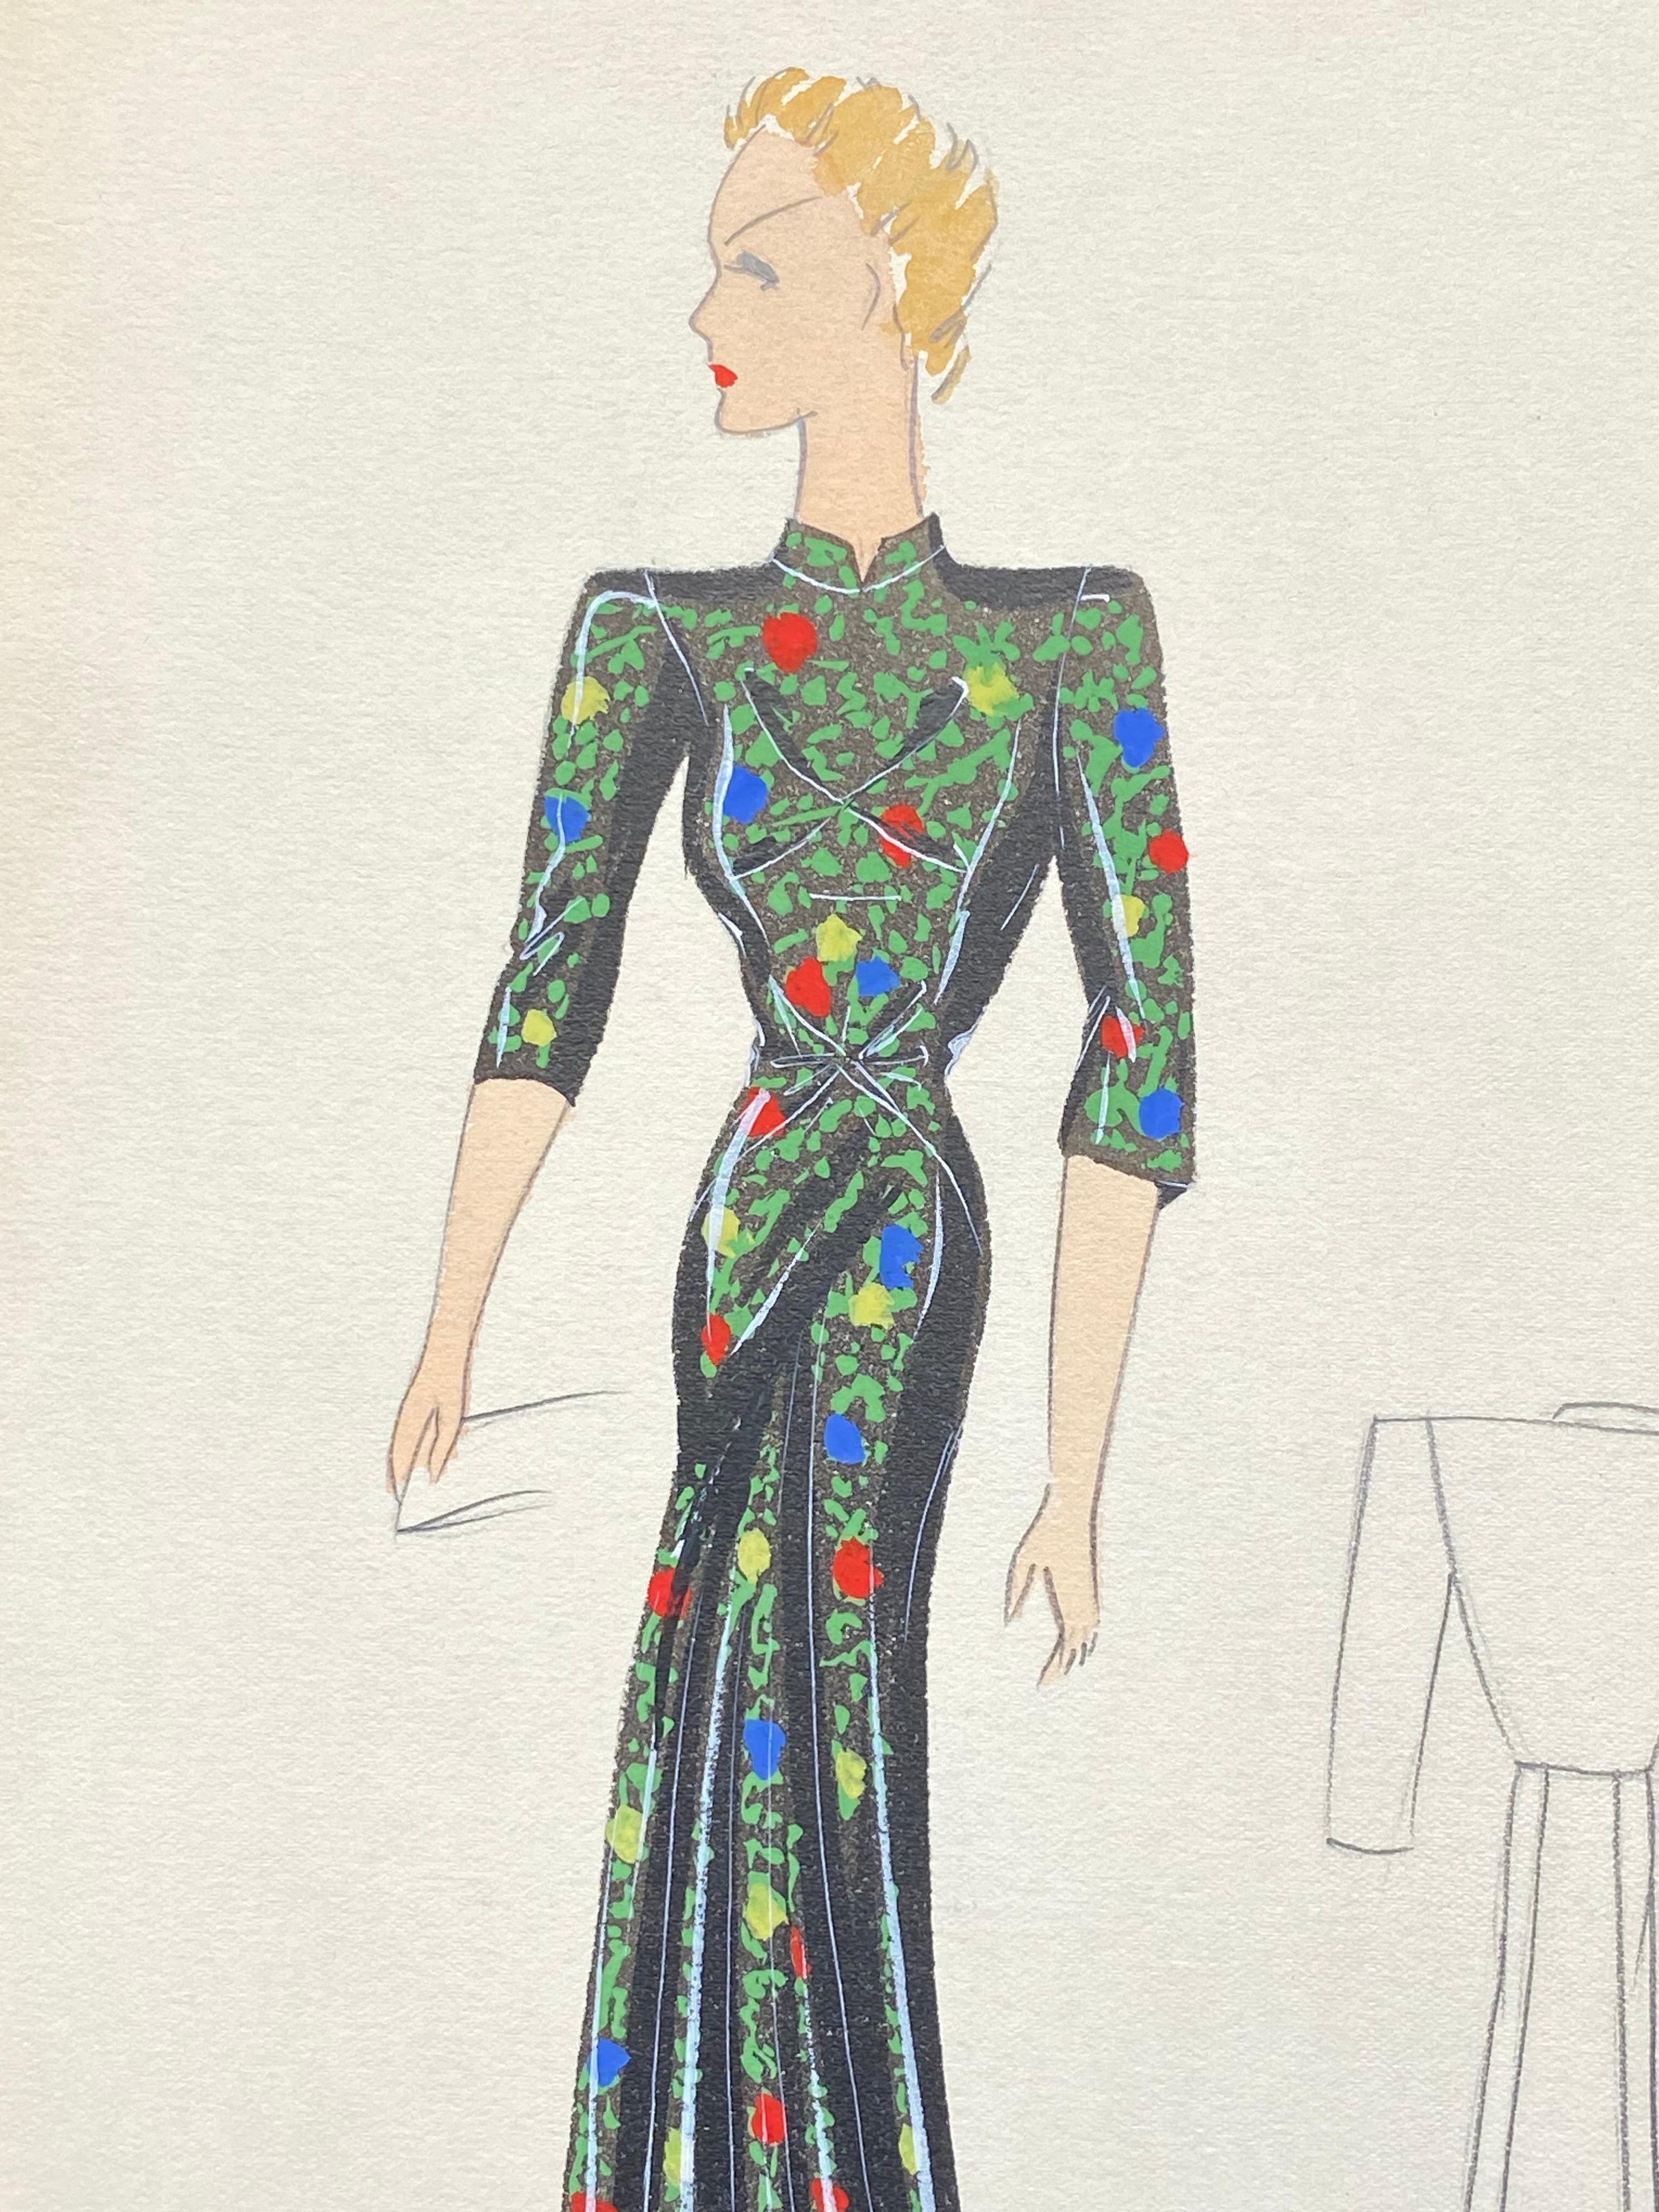 Very stylish, unique and original 1930's French fashion design, no doubt of Parisian origin. 

The painting, executed in gouache/ watercolor and pencil, is dated to the upper corner as well as titled. 

The painting will make wonderful interior